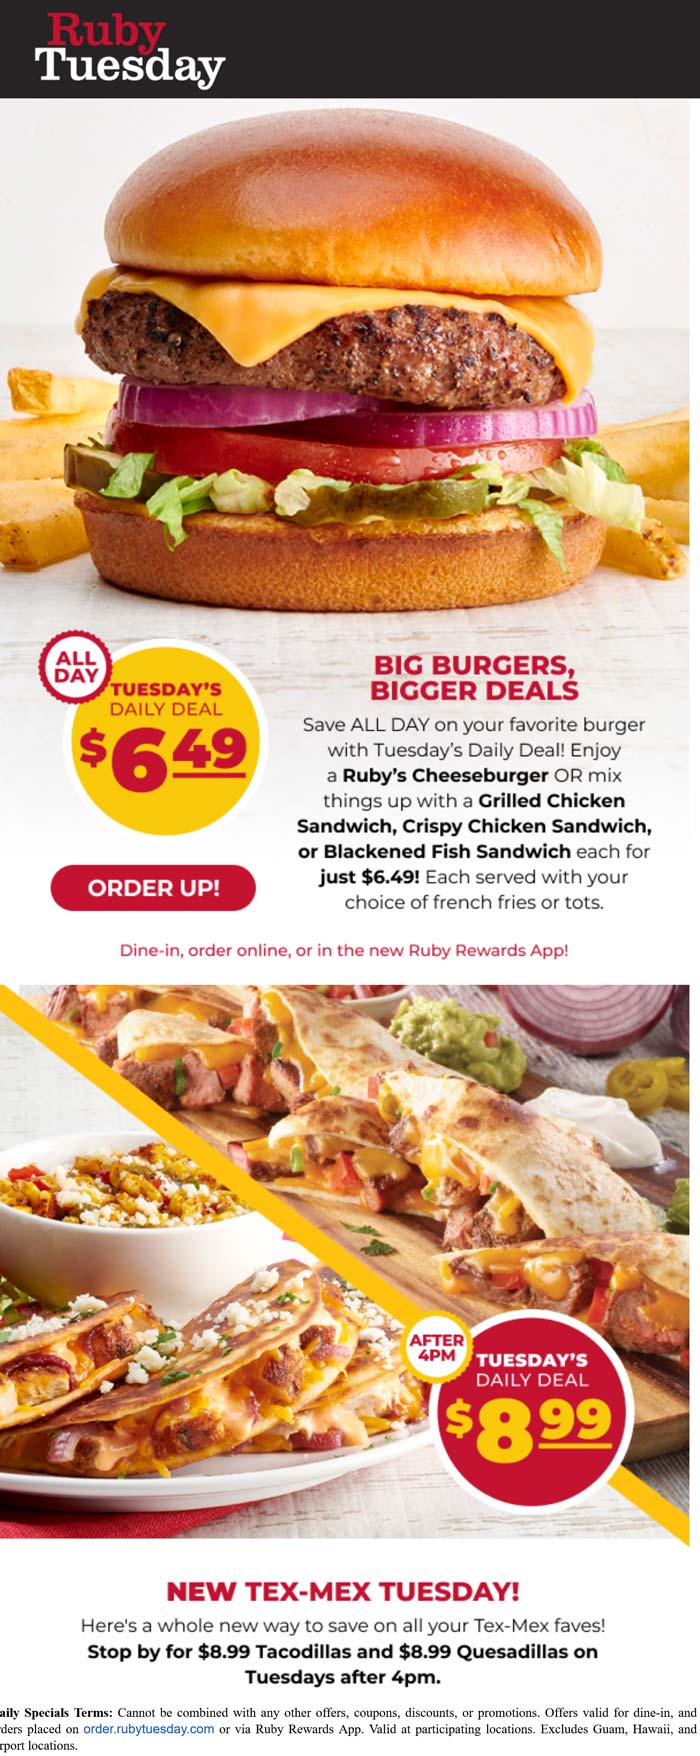 Ruby Tuesday restaurants Coupon  Cheeseburger or chicken + fries = $6.49 & more today at Ruby Tuesday #rubytuesday 